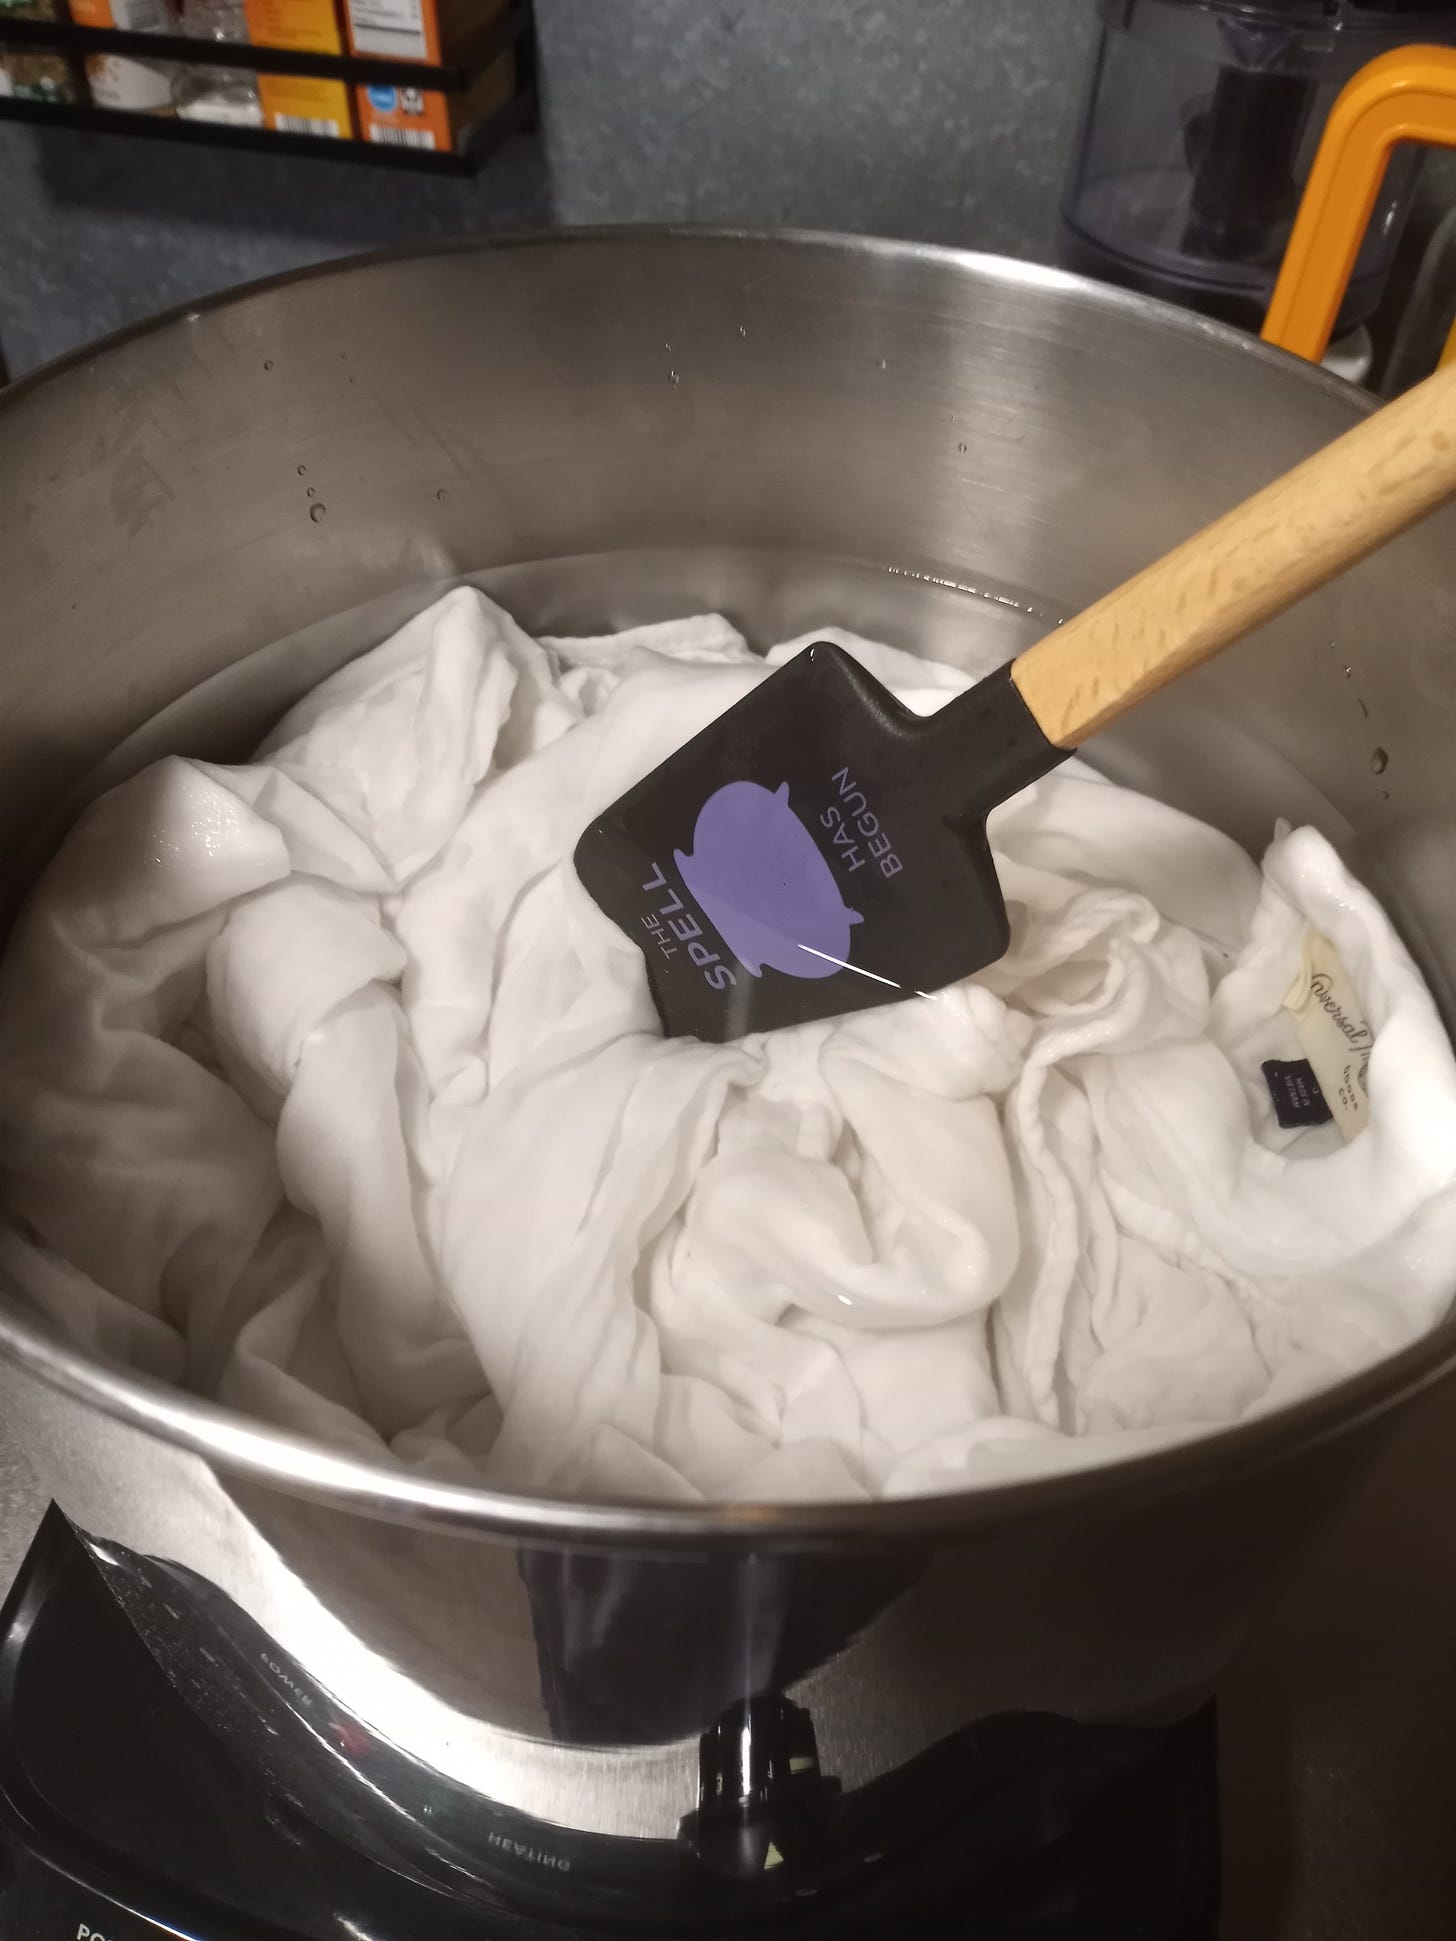 A white dress is submerged in water in a large metal pot, sitting on a burner. A spatula is stirring the mixture.